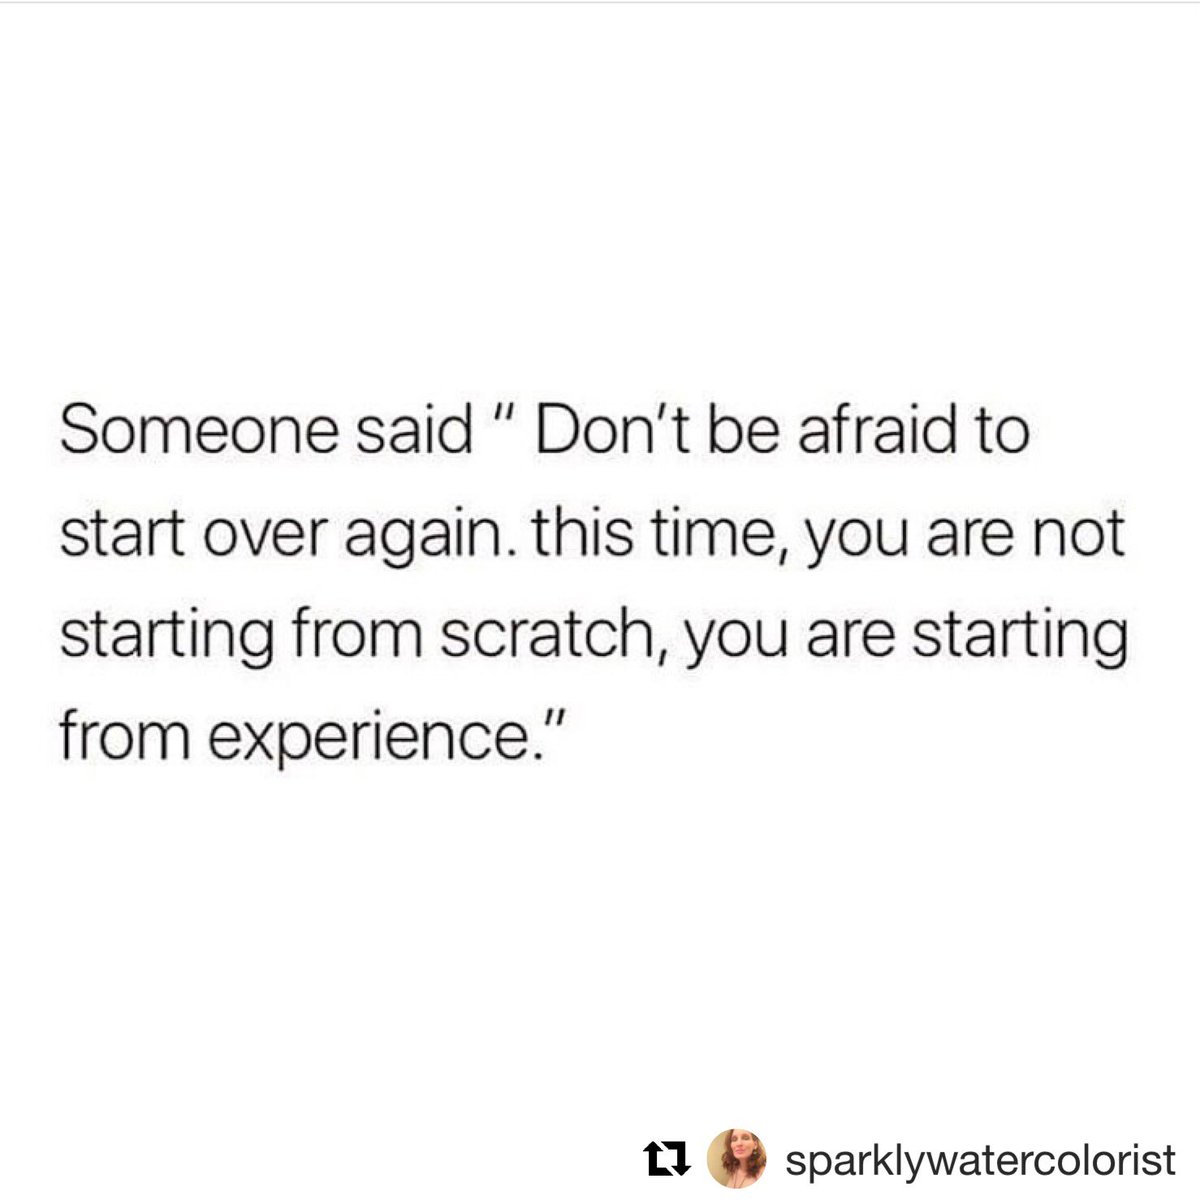 Every new day, every new hour, every new minute we have opportunities ... no matter where you’re starting from, the key is to start.
#startfromwhereyouare #startwithwhatyouhave 
#Repost #artistlife #artlife #quotesaboutart #quotesaboutlife #qotd #courage #fearless #doitagain #art